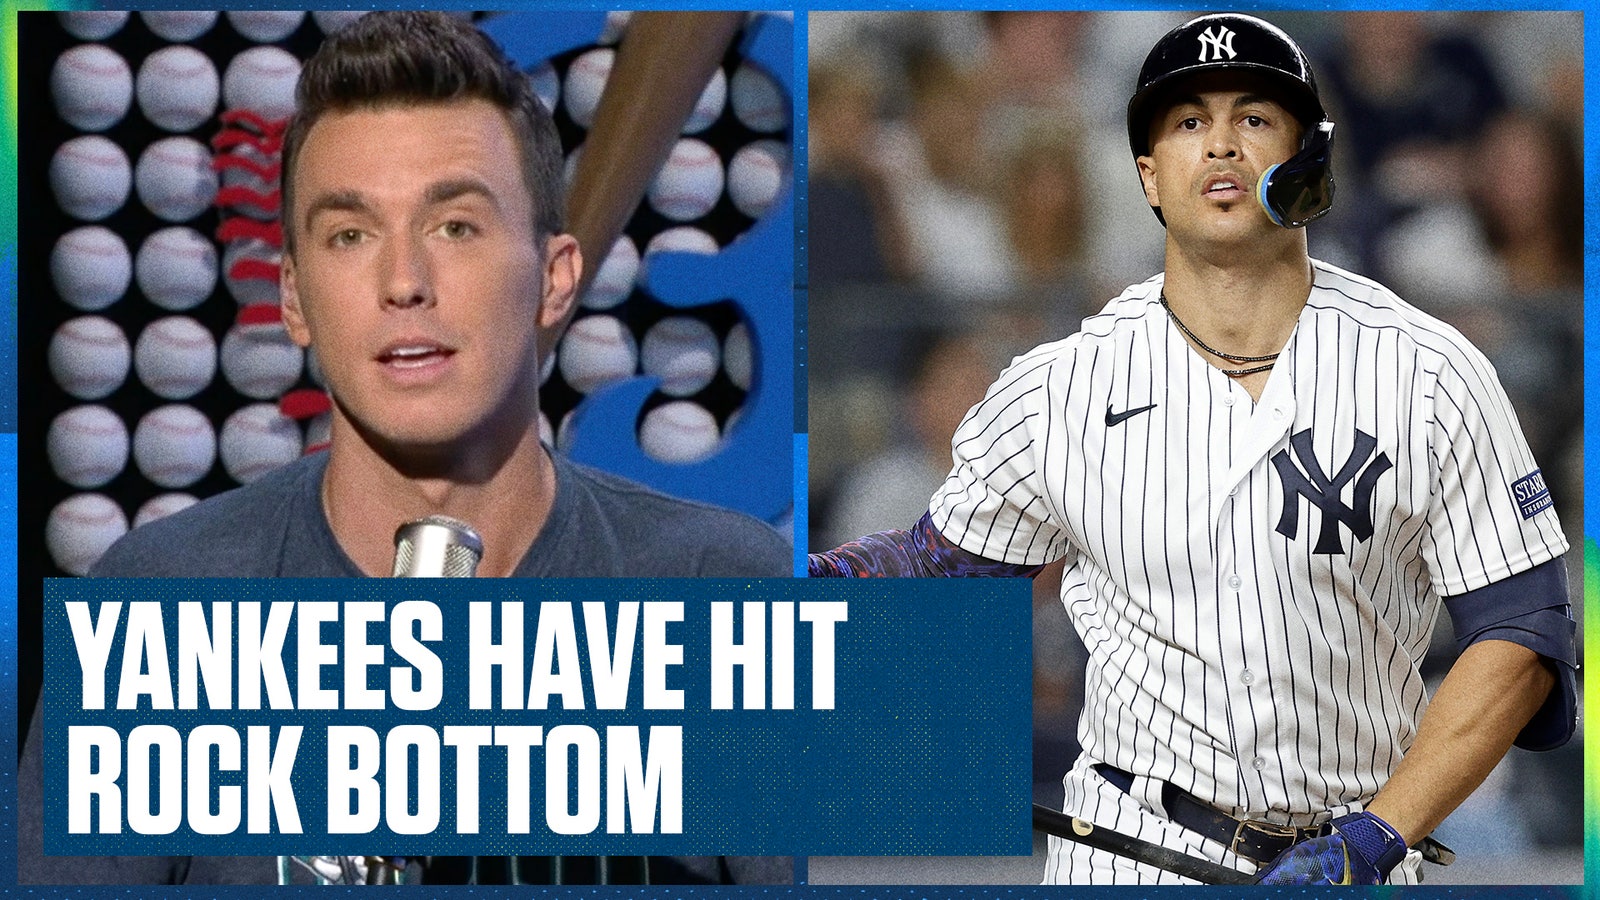 The Yankees have officially hit rock bottom 